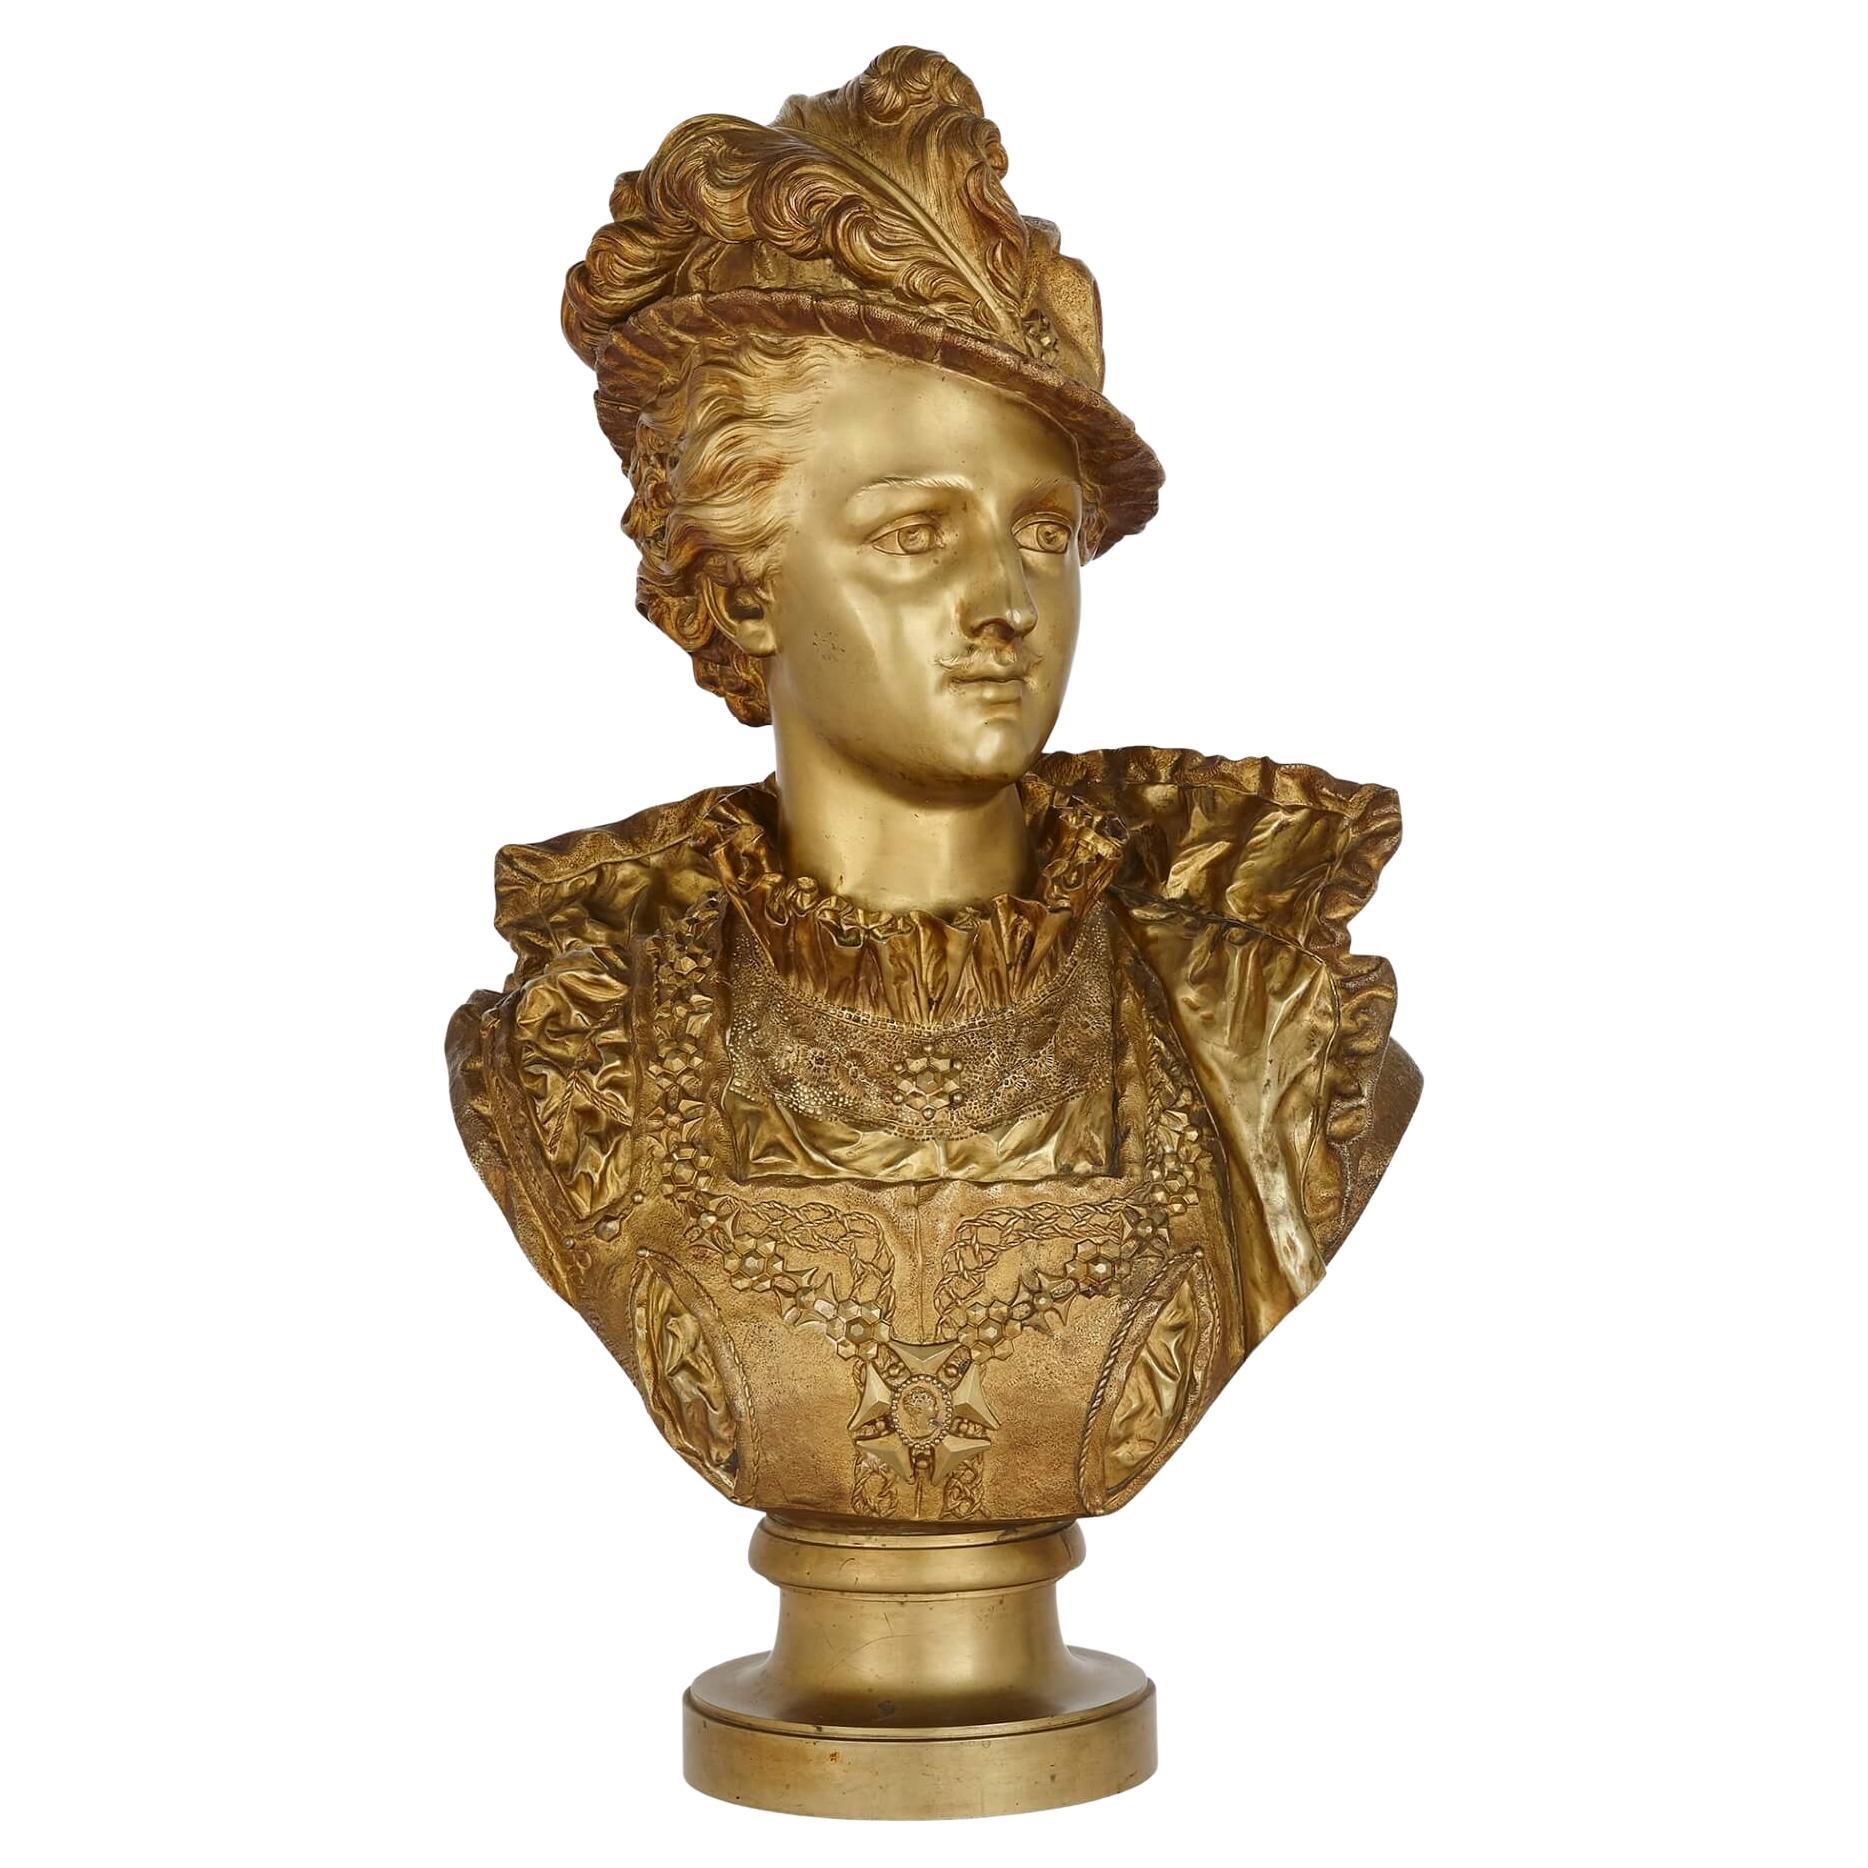 Ormolu Bust of a 16th Century Prince, by Rancoulet